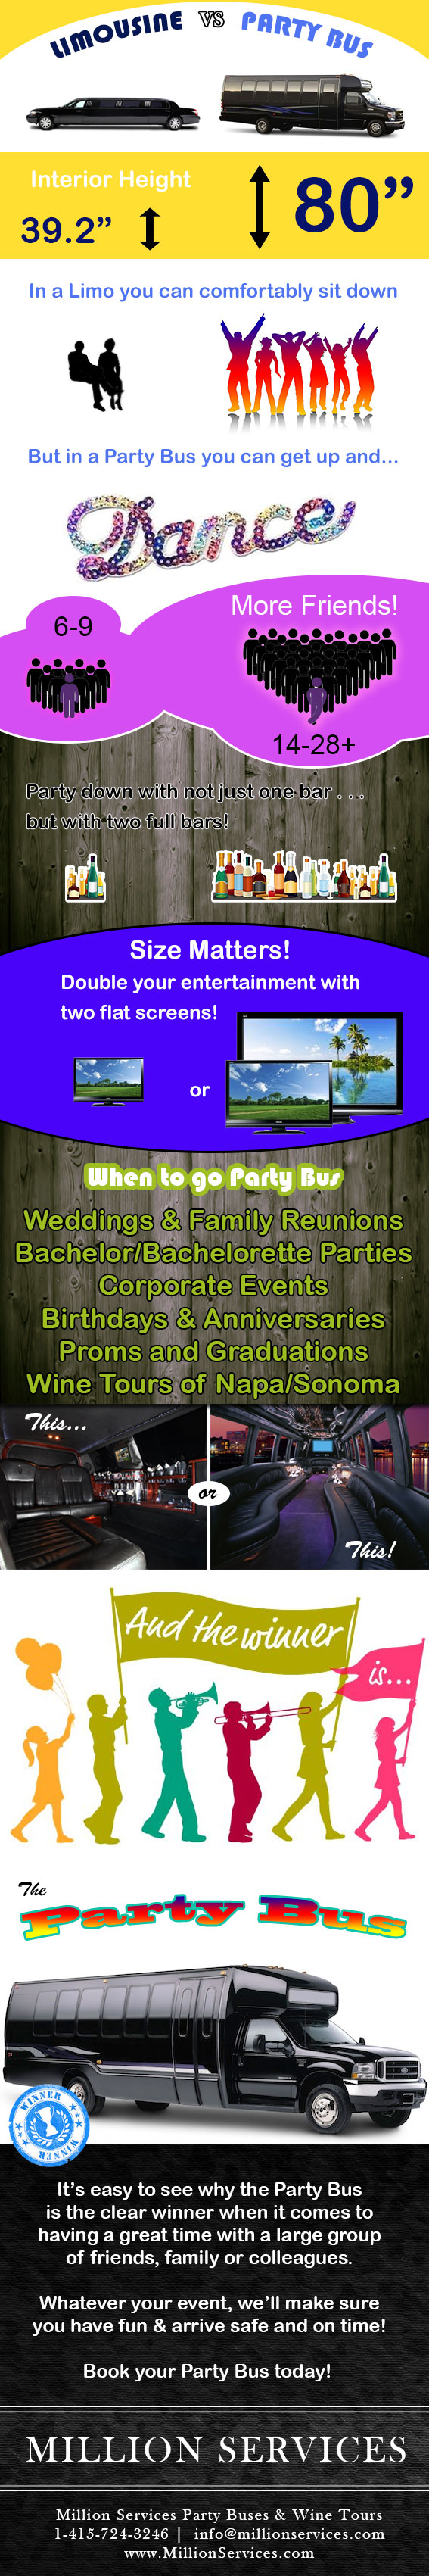 Limo or Party Bus: Which is better for you?